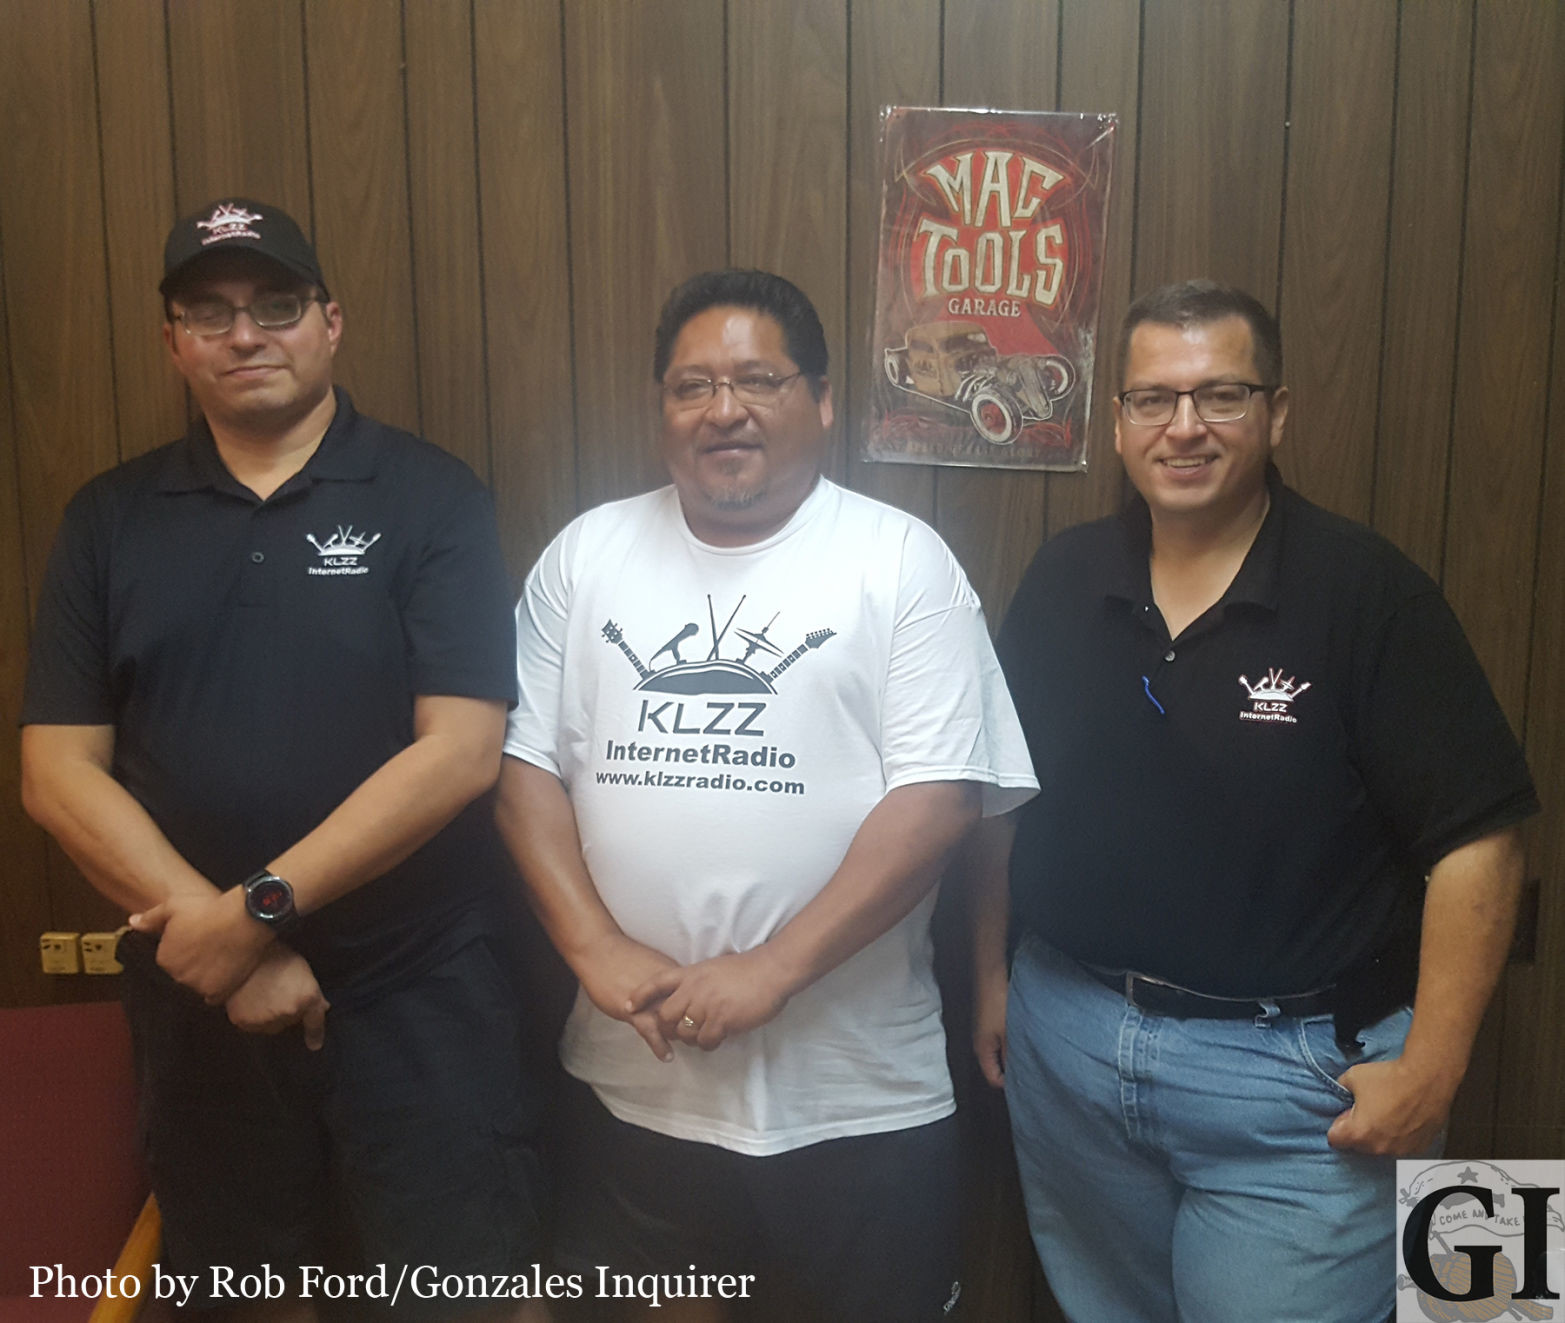 In a little over six months, John Anthony Vega, Greg Ramirez and Don Page have taken internet radio station KLZZ from 50 to 2,000 listeners. The station has a variety of programs that feature Tejano, Country and Rock music.